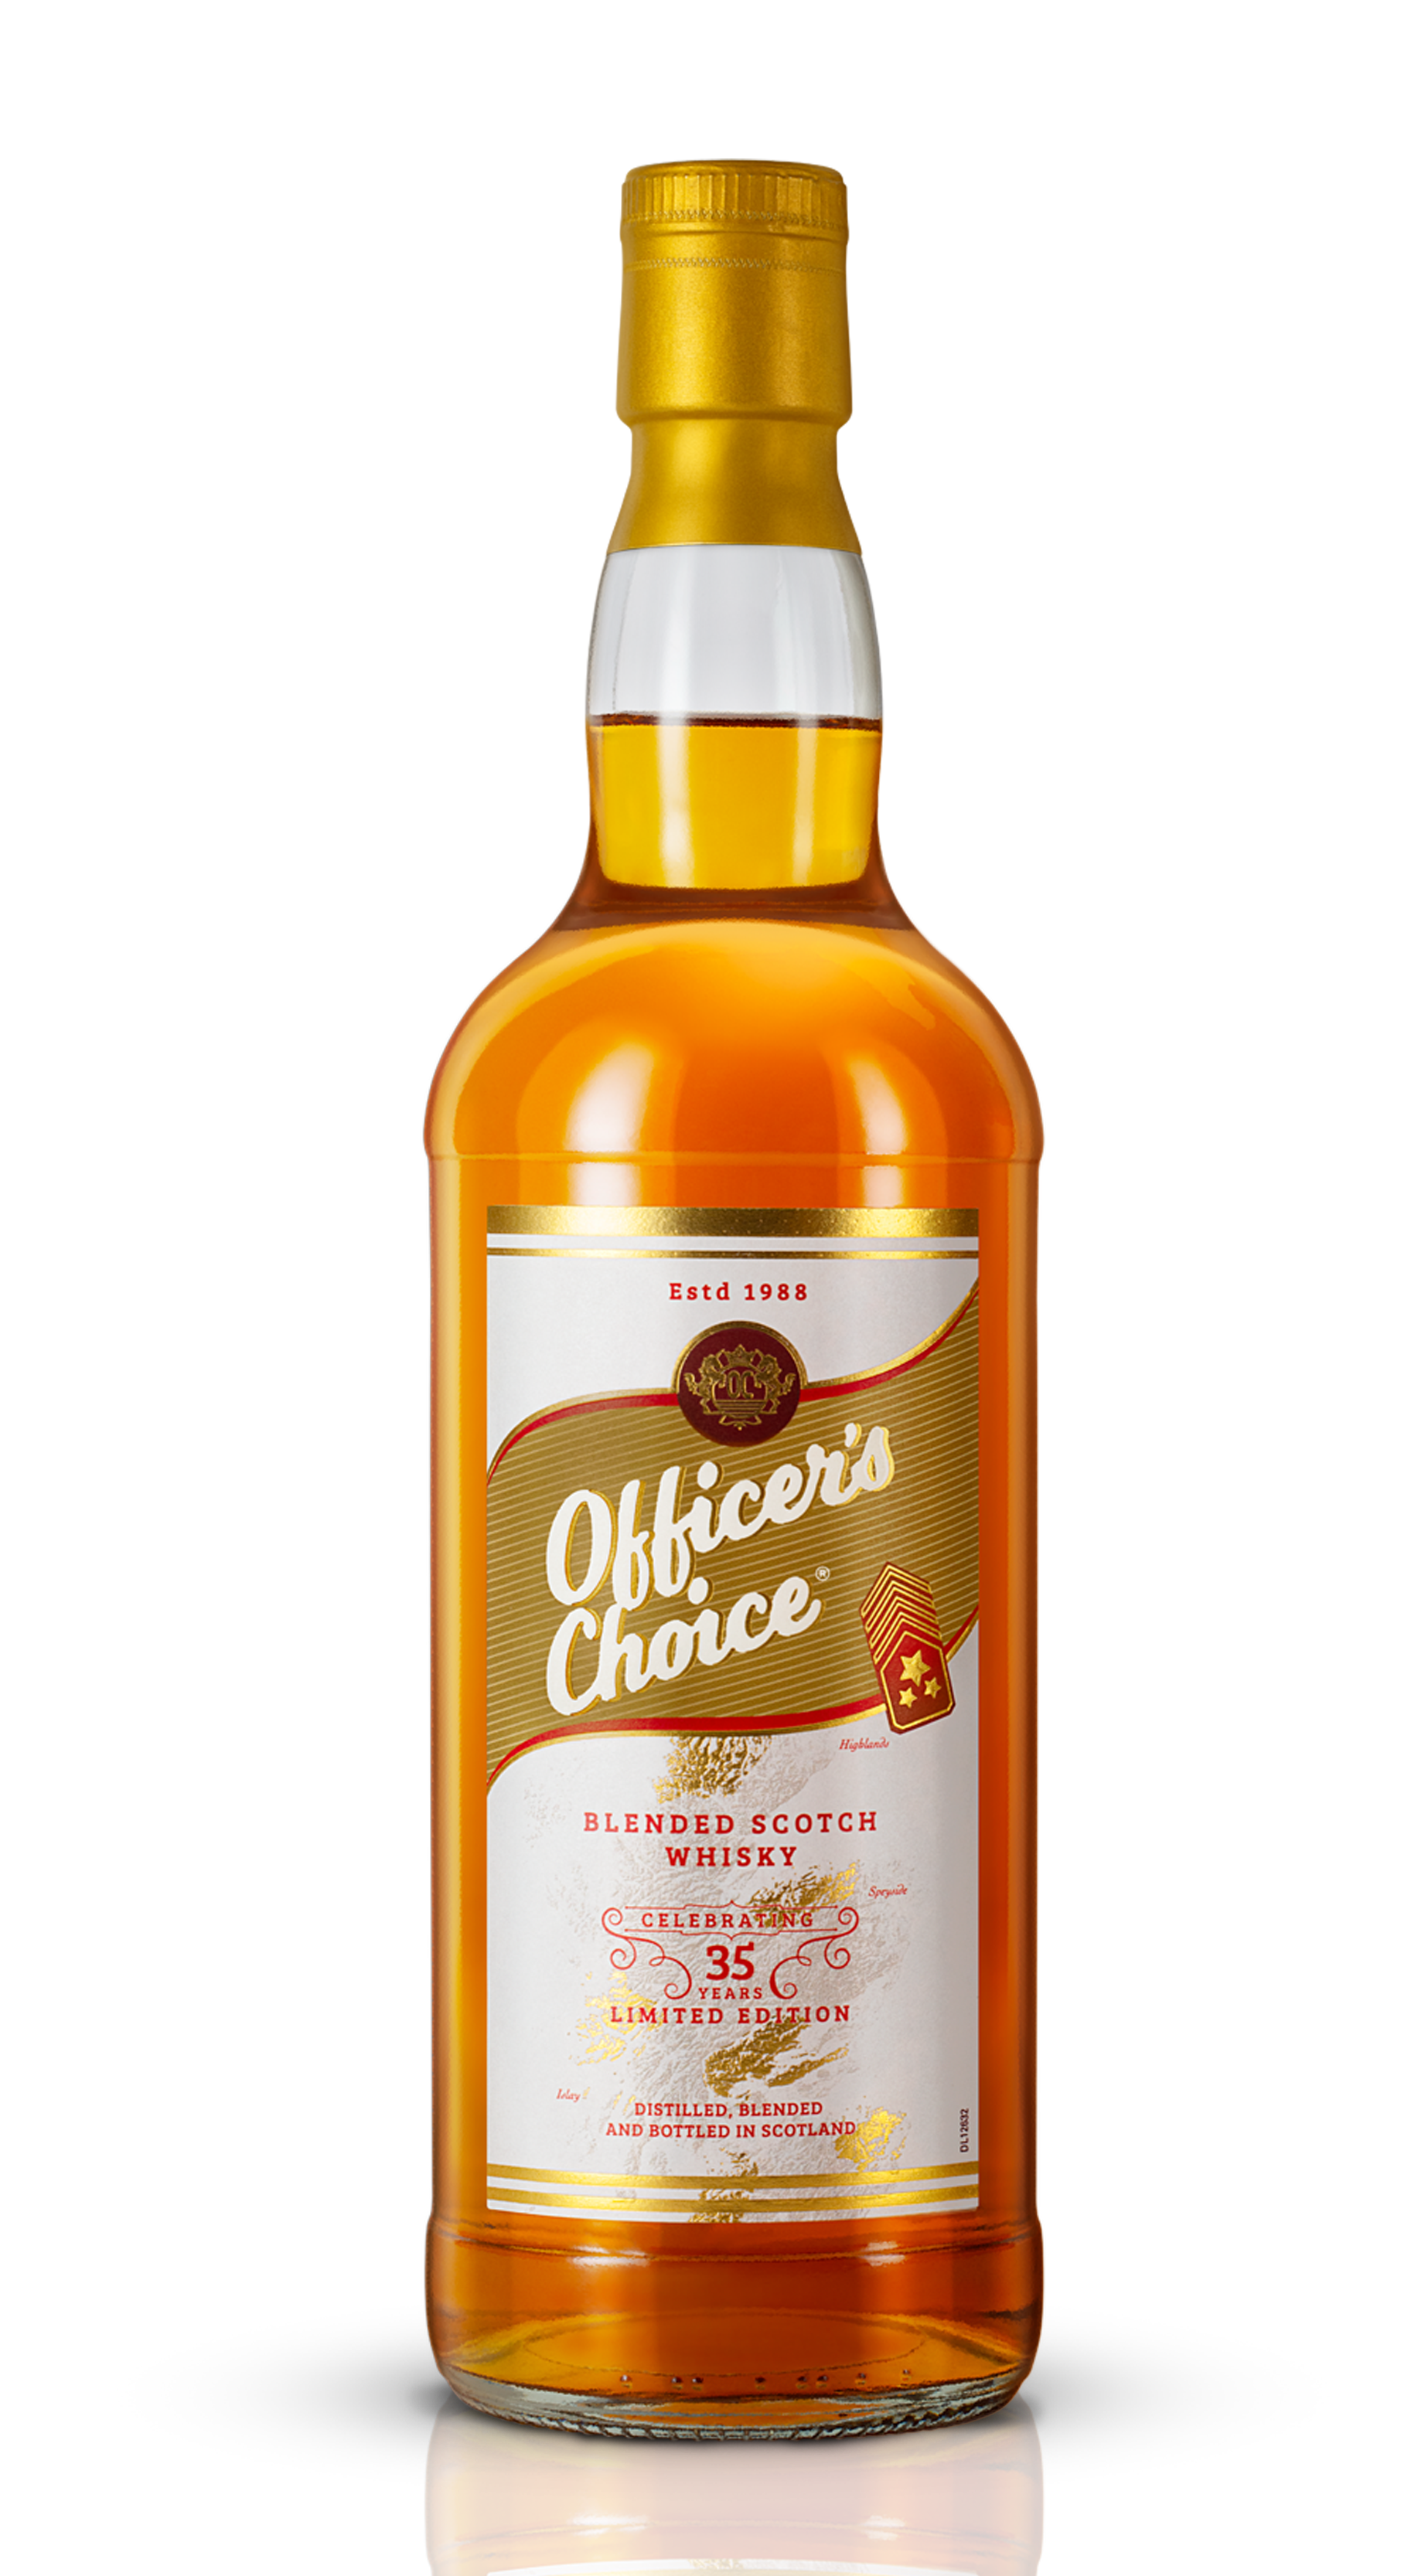 Officer’s Choice Blended Scotch Whisky 